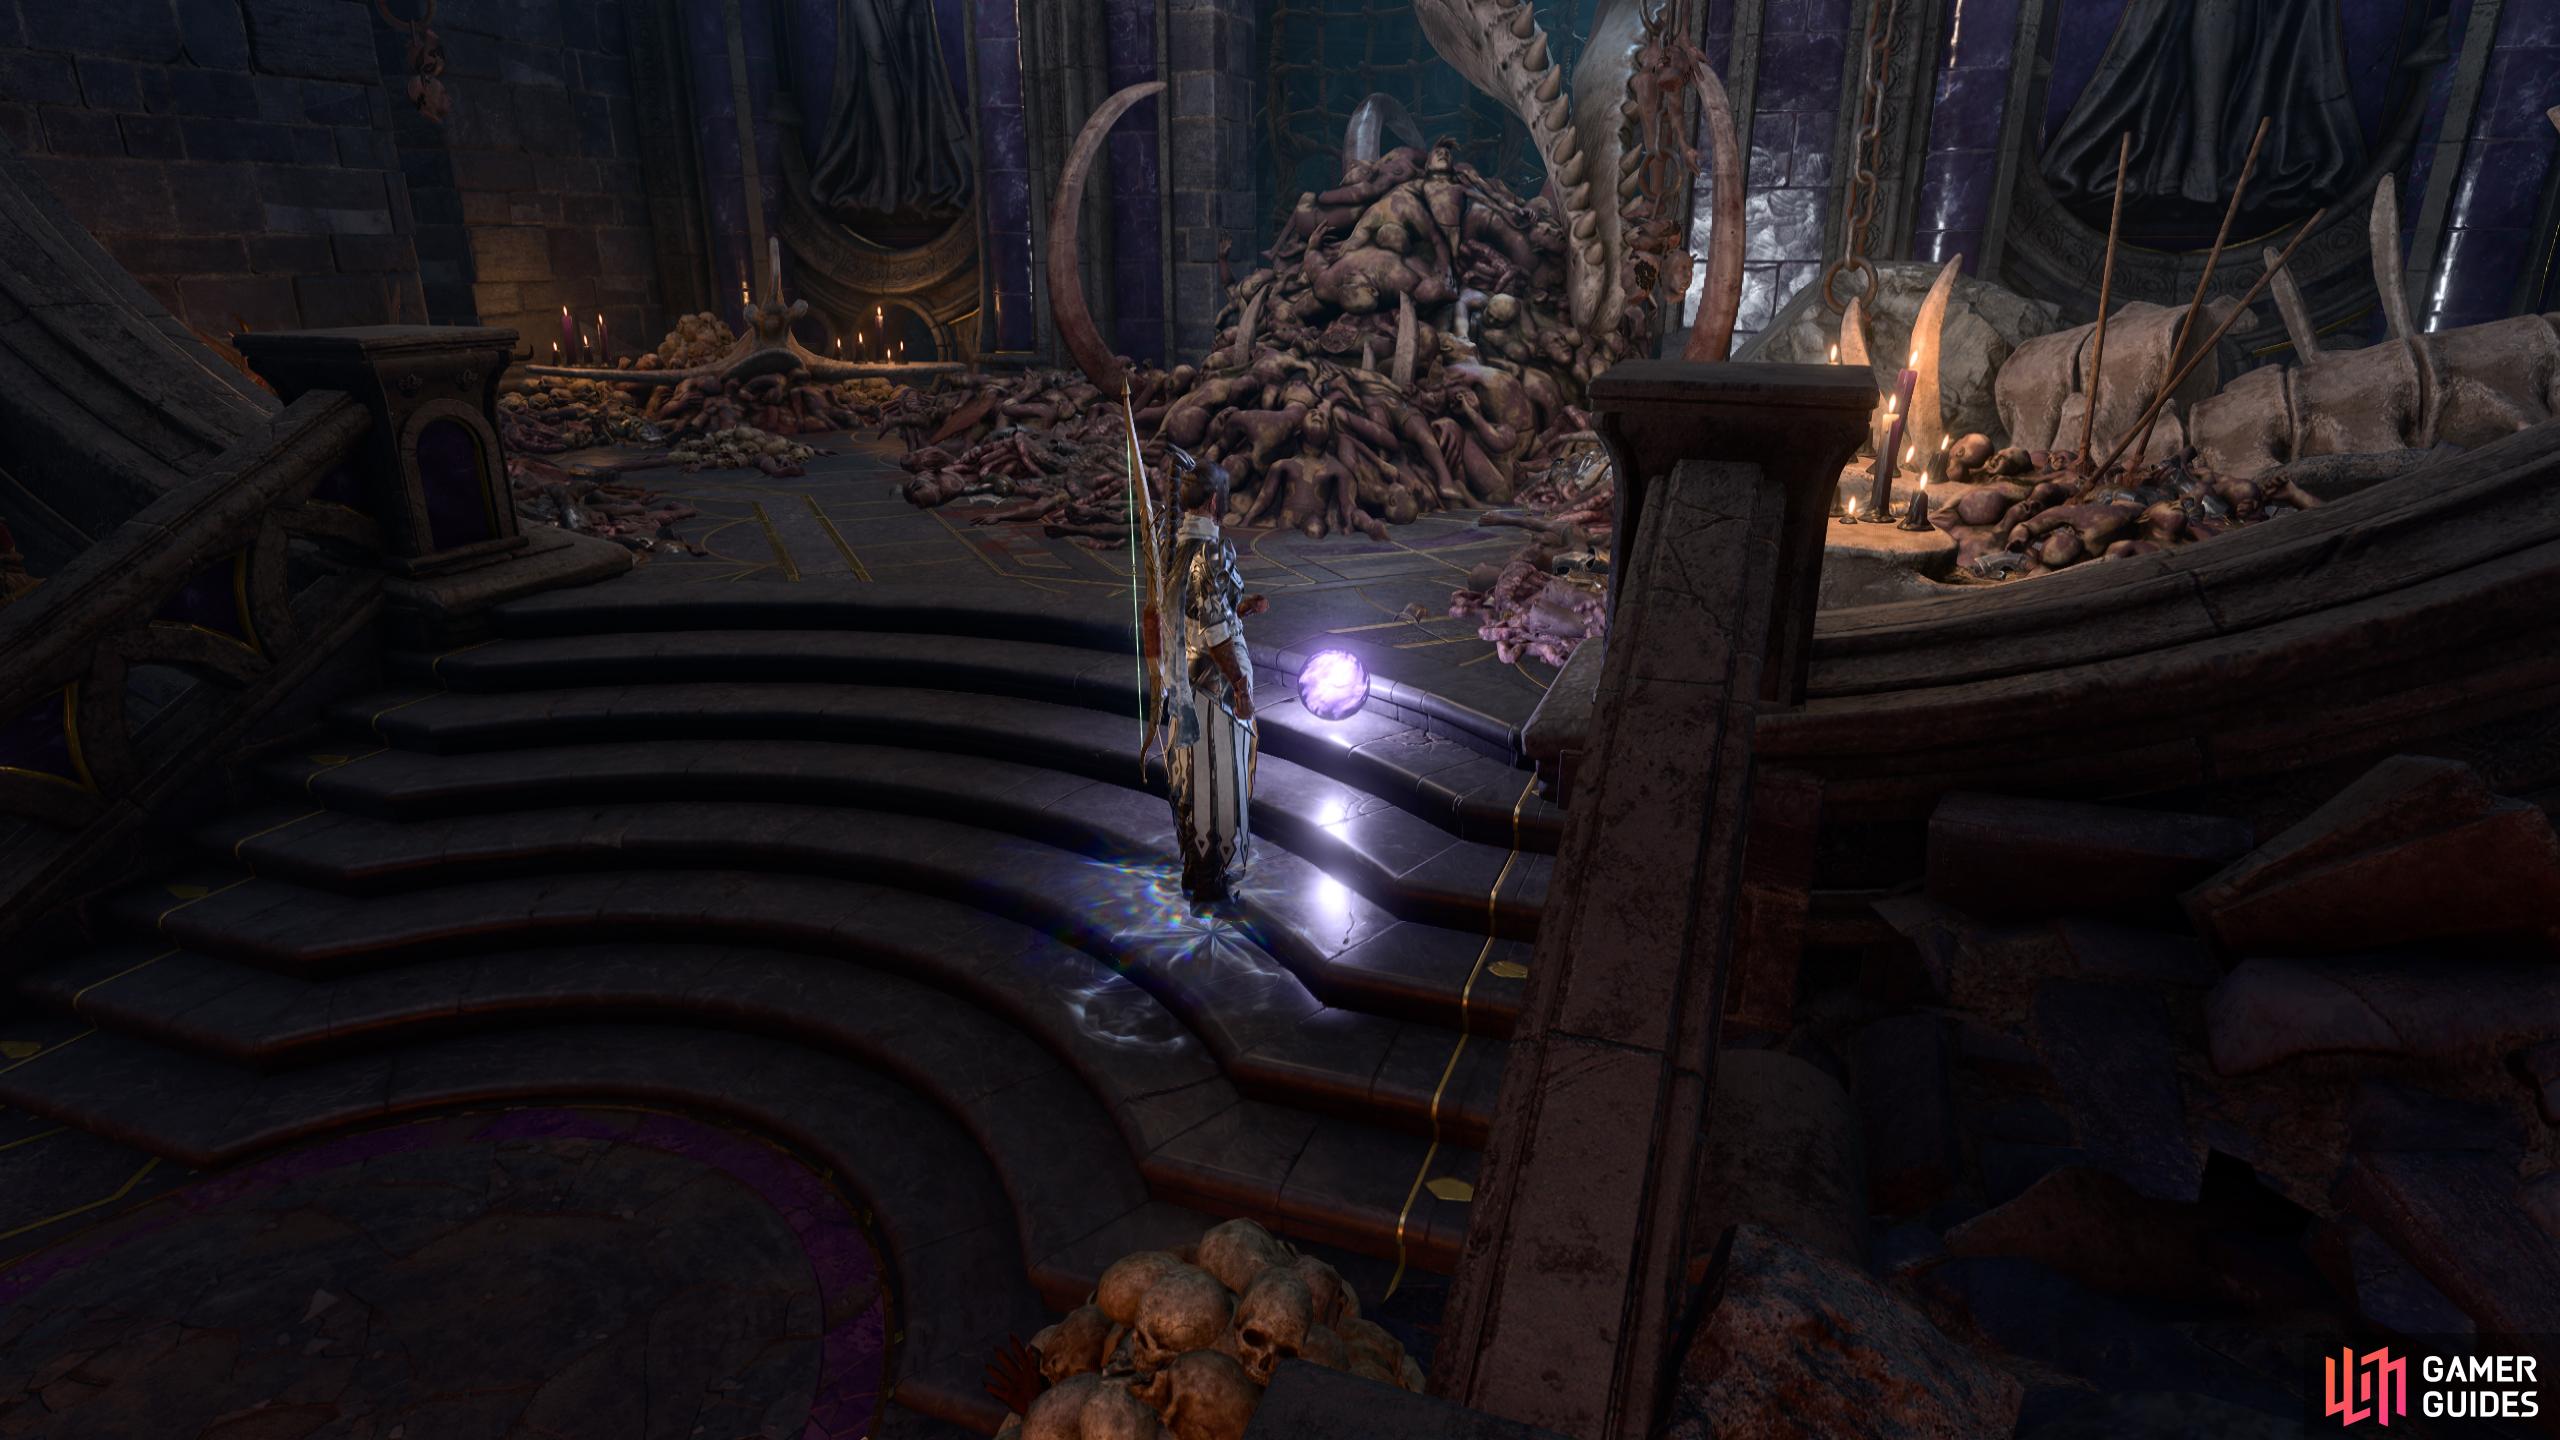 You’ll need four Umbral Gems to get through the Gauntlet of Shar.